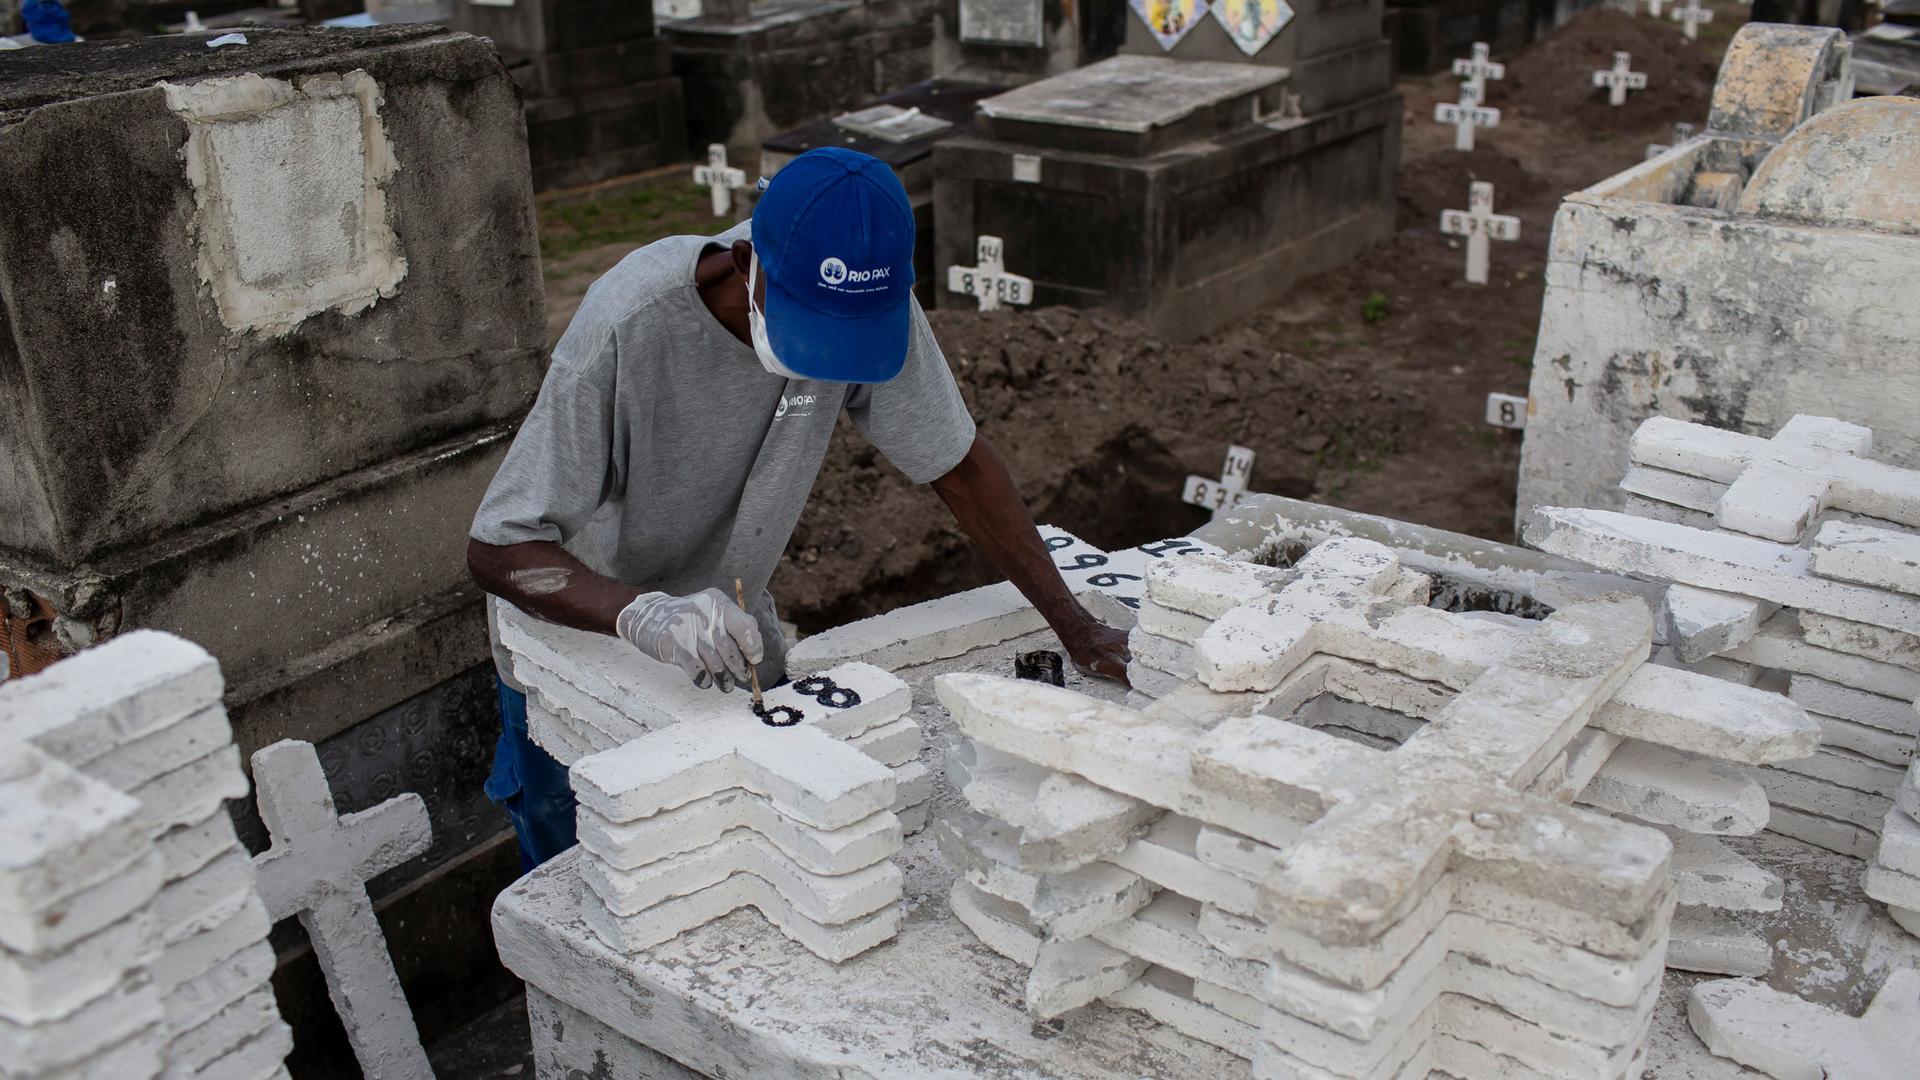 A man is shown wearing a blue hat and standing in front of dozens of white crosses while painting numbers on the crosses.